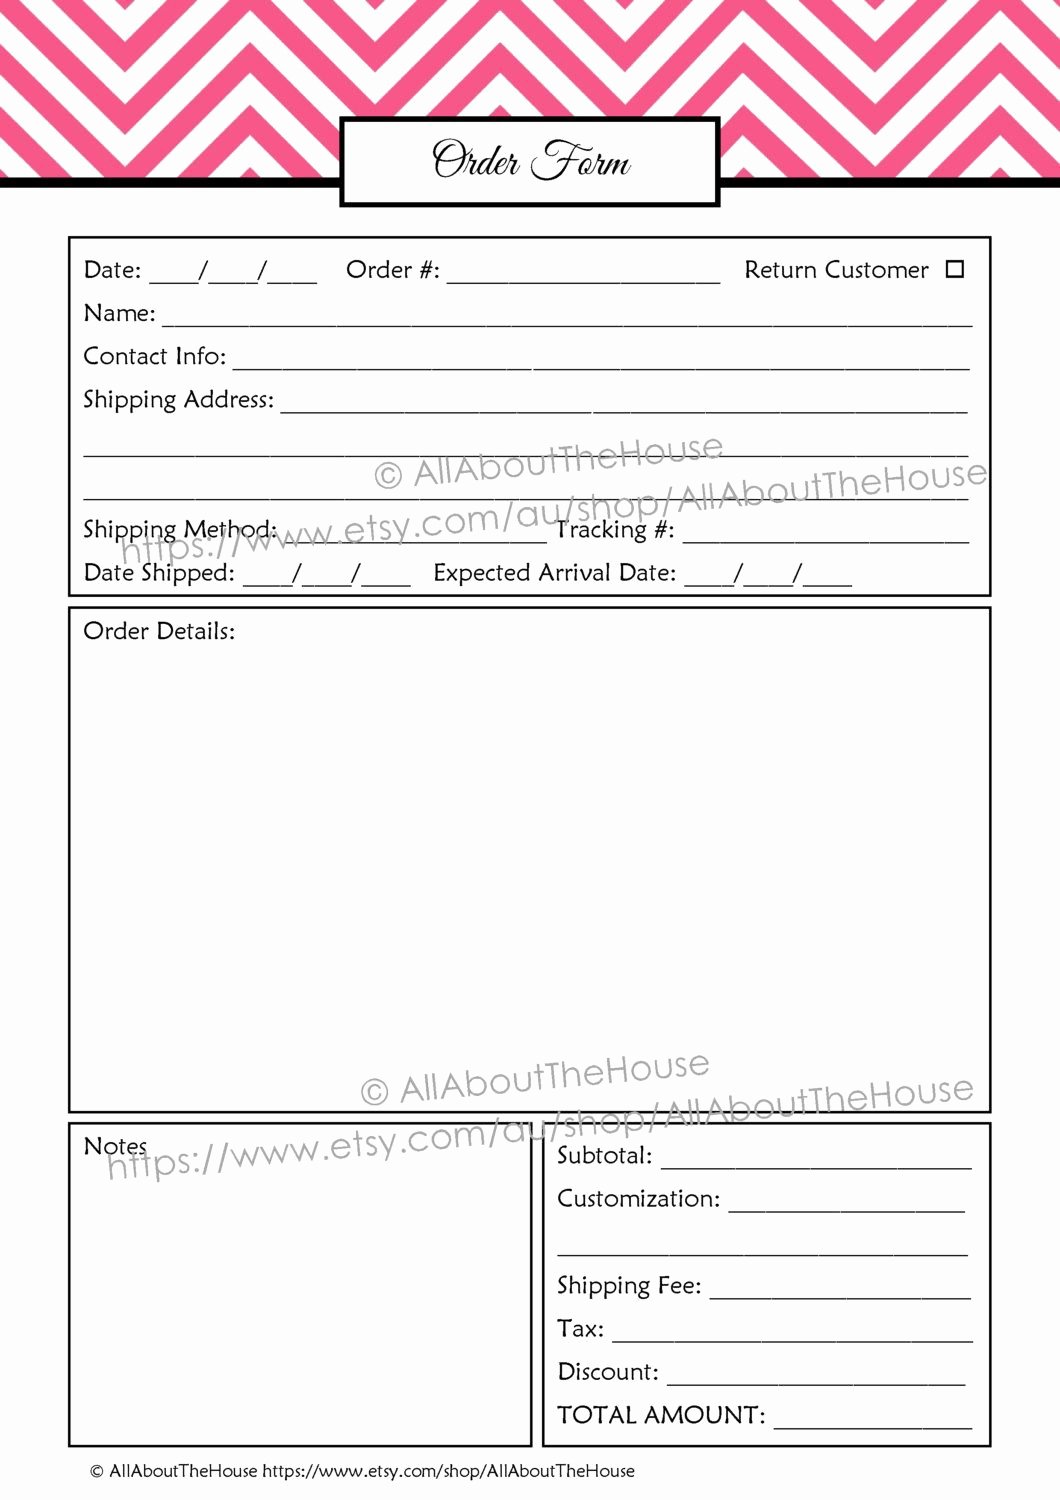 Printable order form Template Beautiful Best 25 order form Ideas On Pinterest